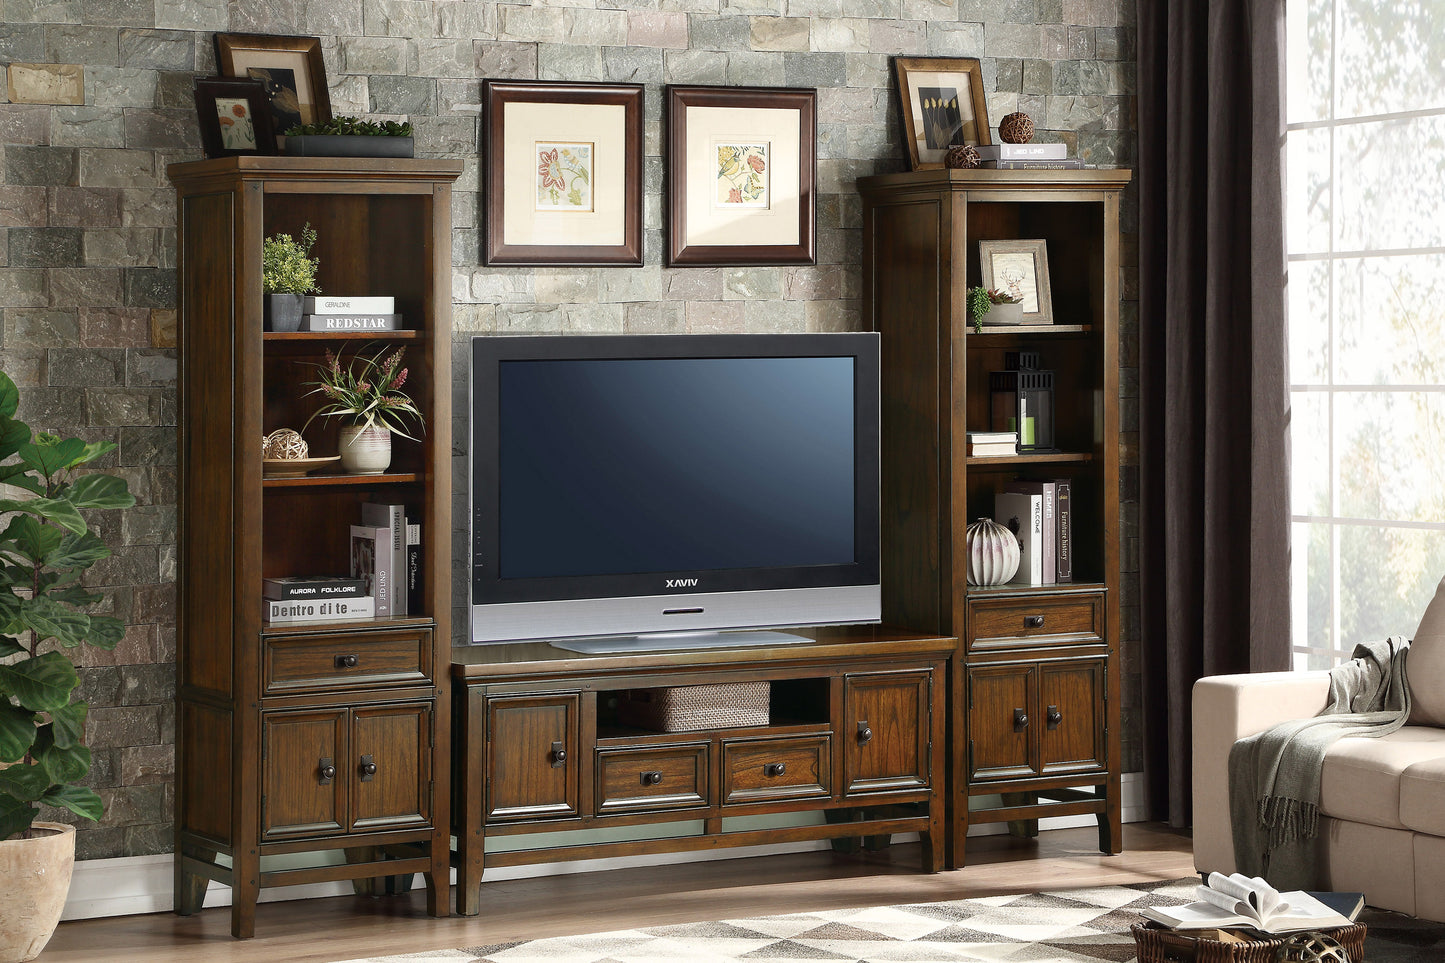 Frazier Park 59" TV Stand BROWN CHERRY ONLY